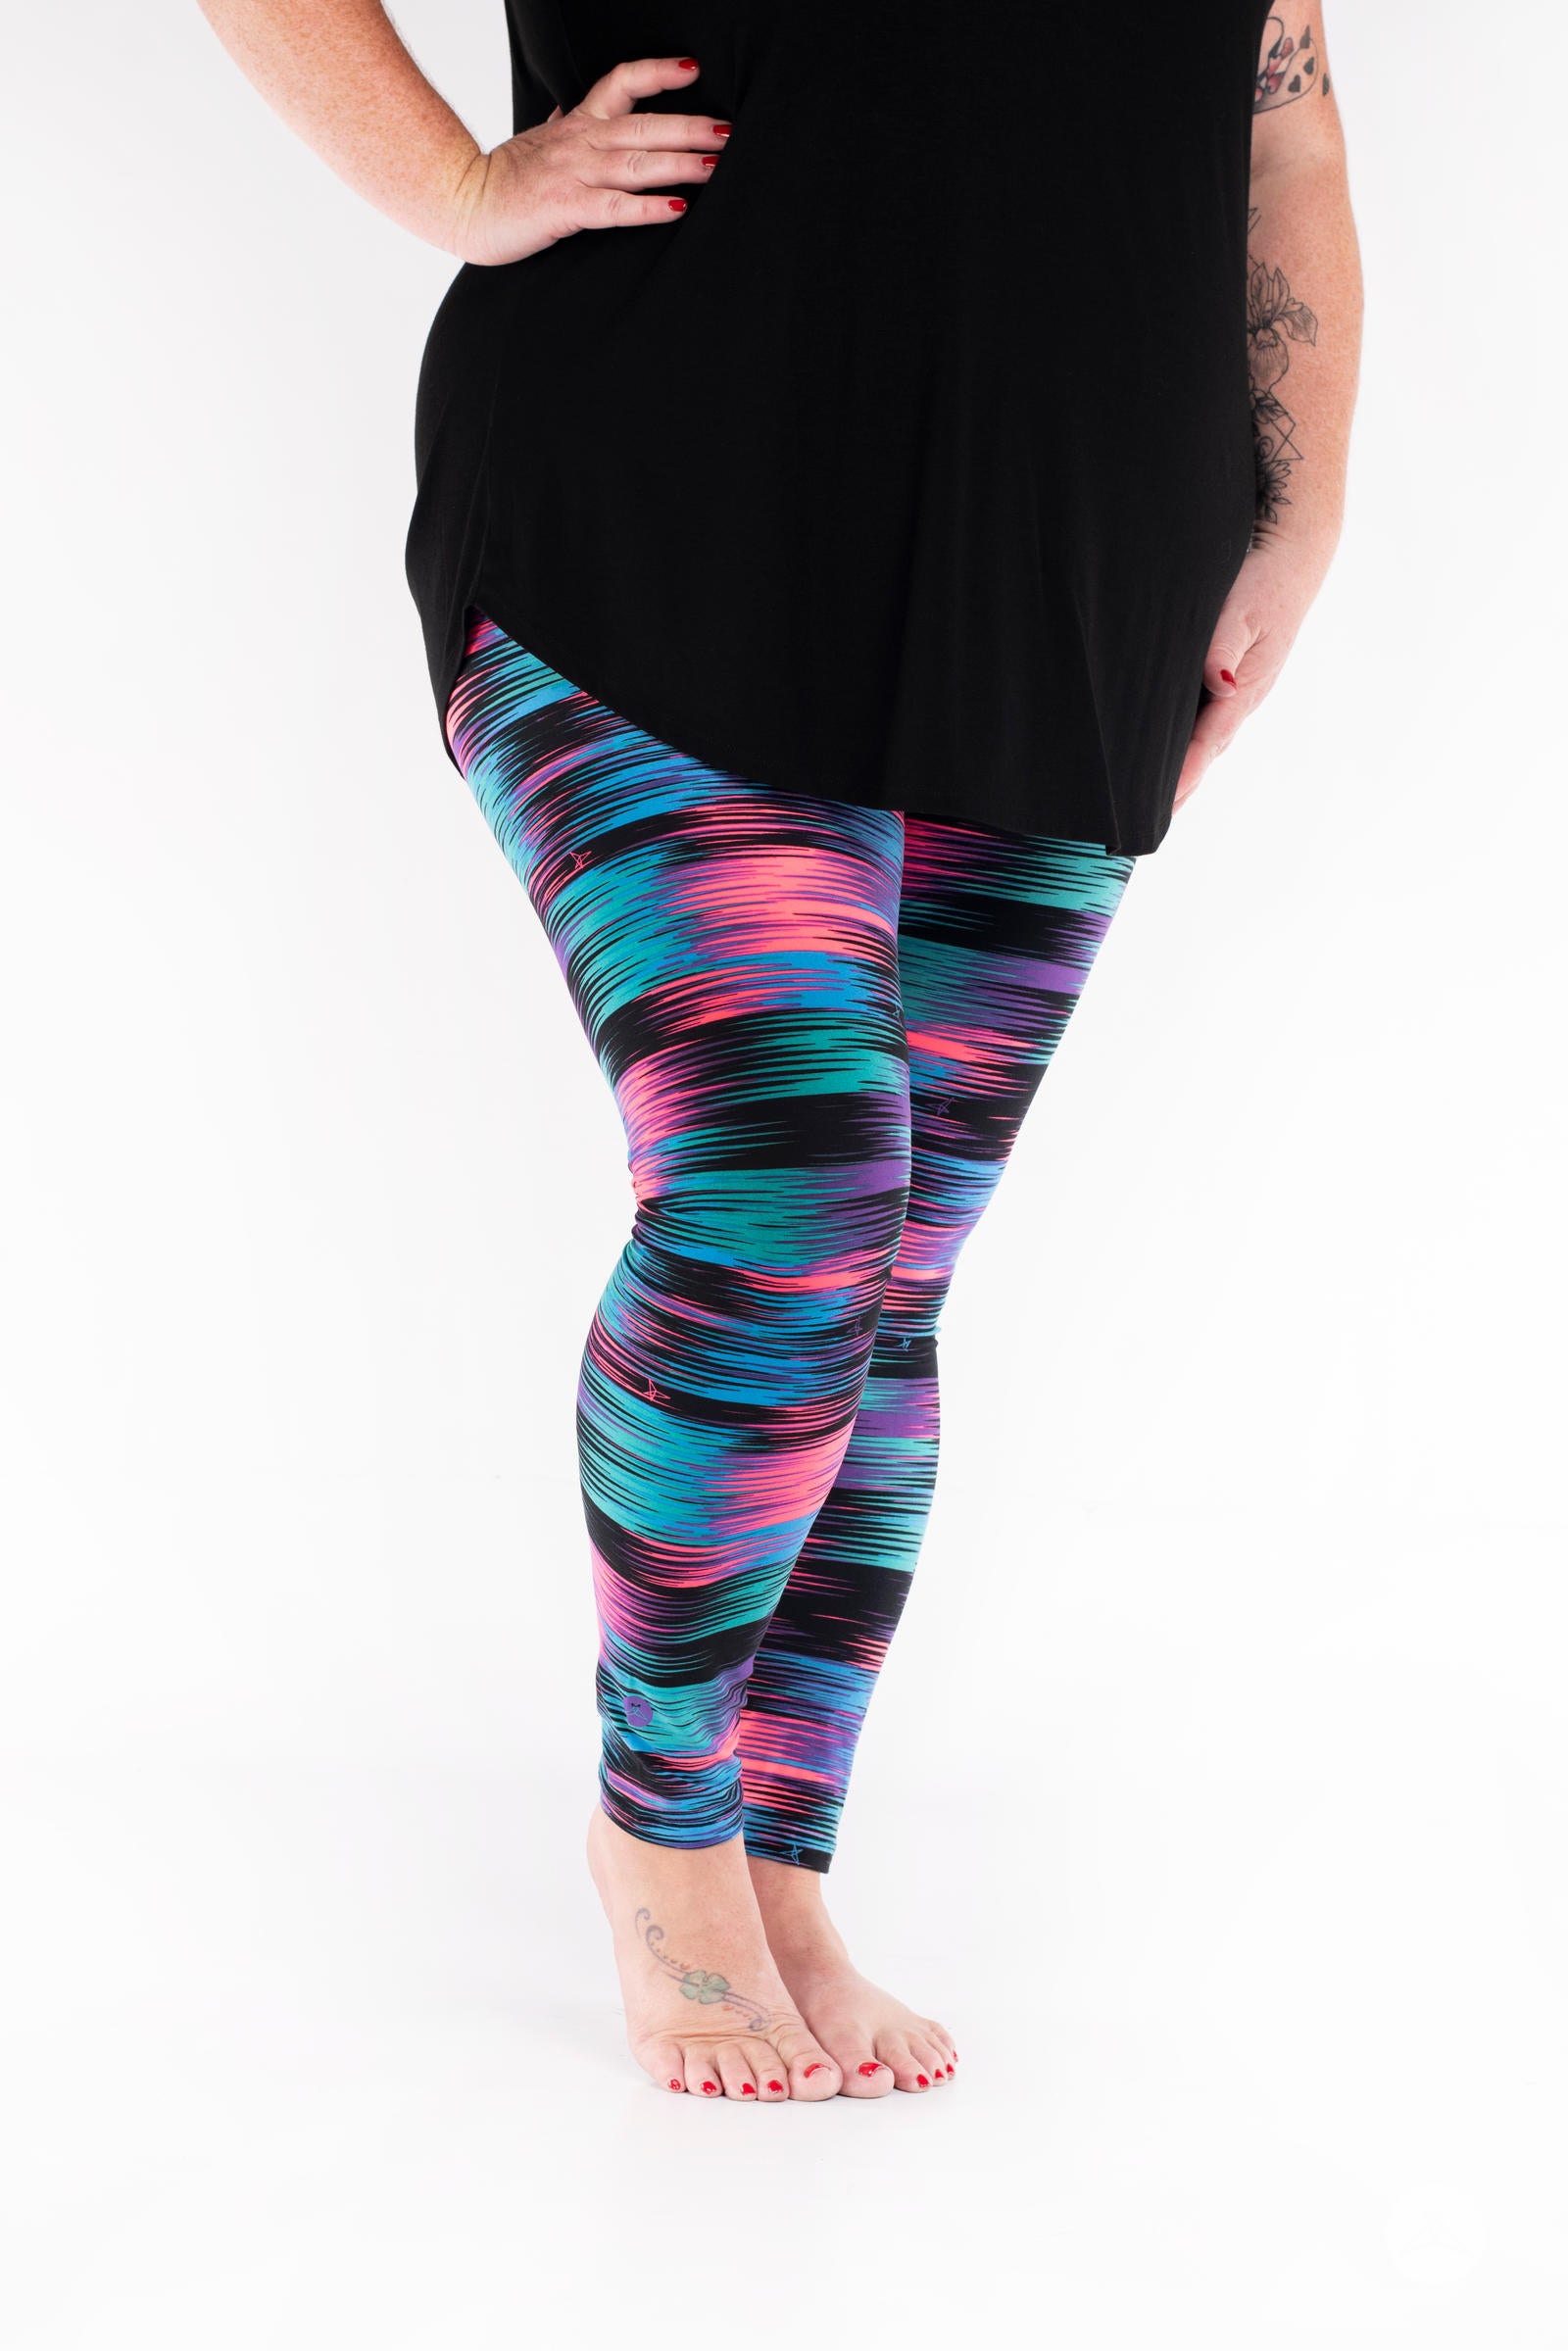 Out of Focus Plus Patterned Leggings